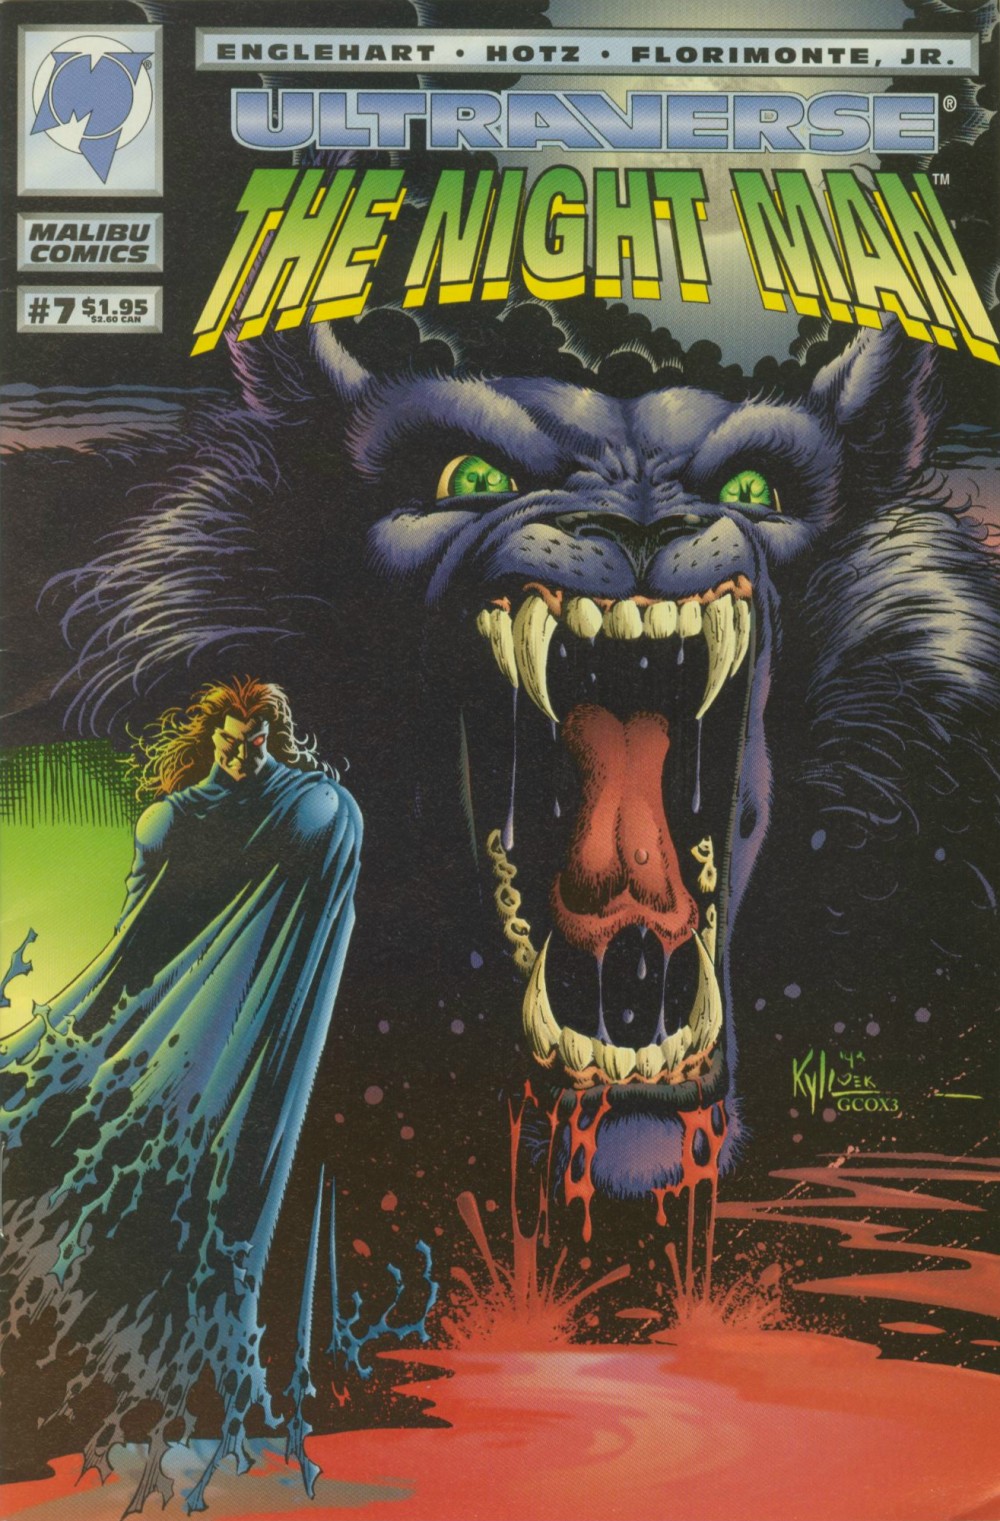 Read online The Night Man comic -  Issue #7 - 1